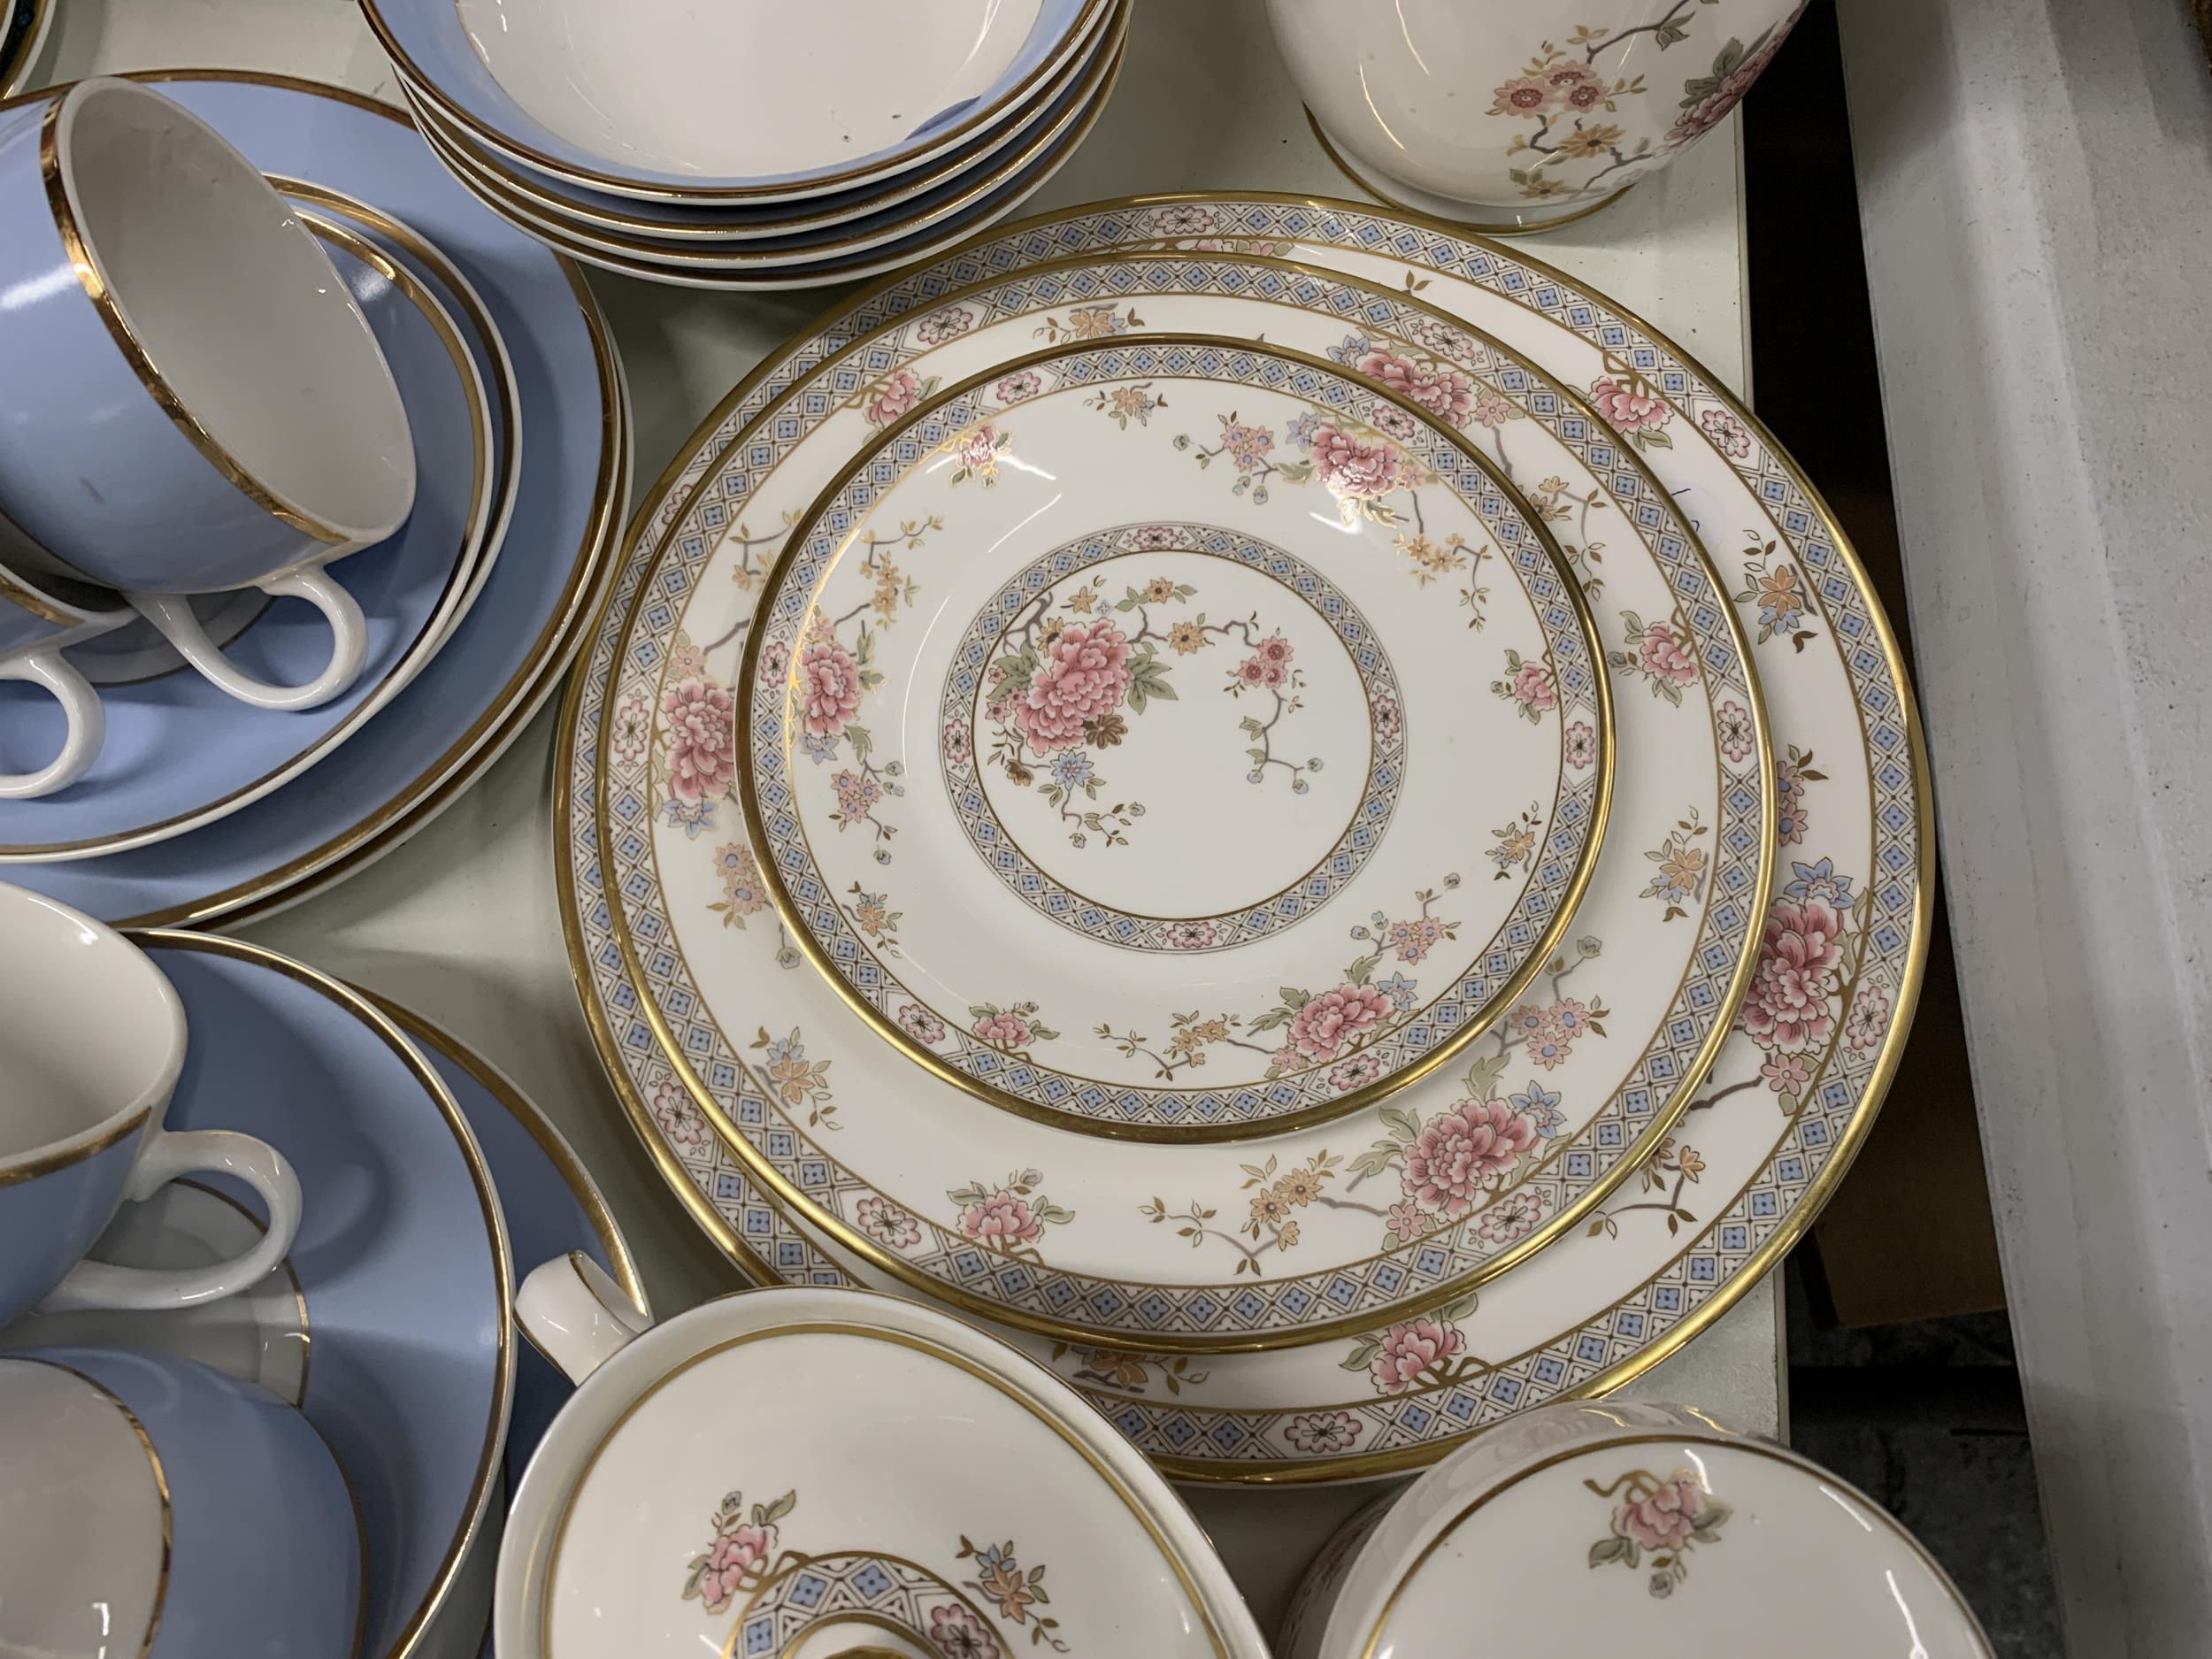 A QUANTITY OF ROYAL DOULTON TEAWARE TO INCLUDE 'CANTON', PLATES, A LARGE BOWL, PLANTER LIDDED - Image 6 of 7